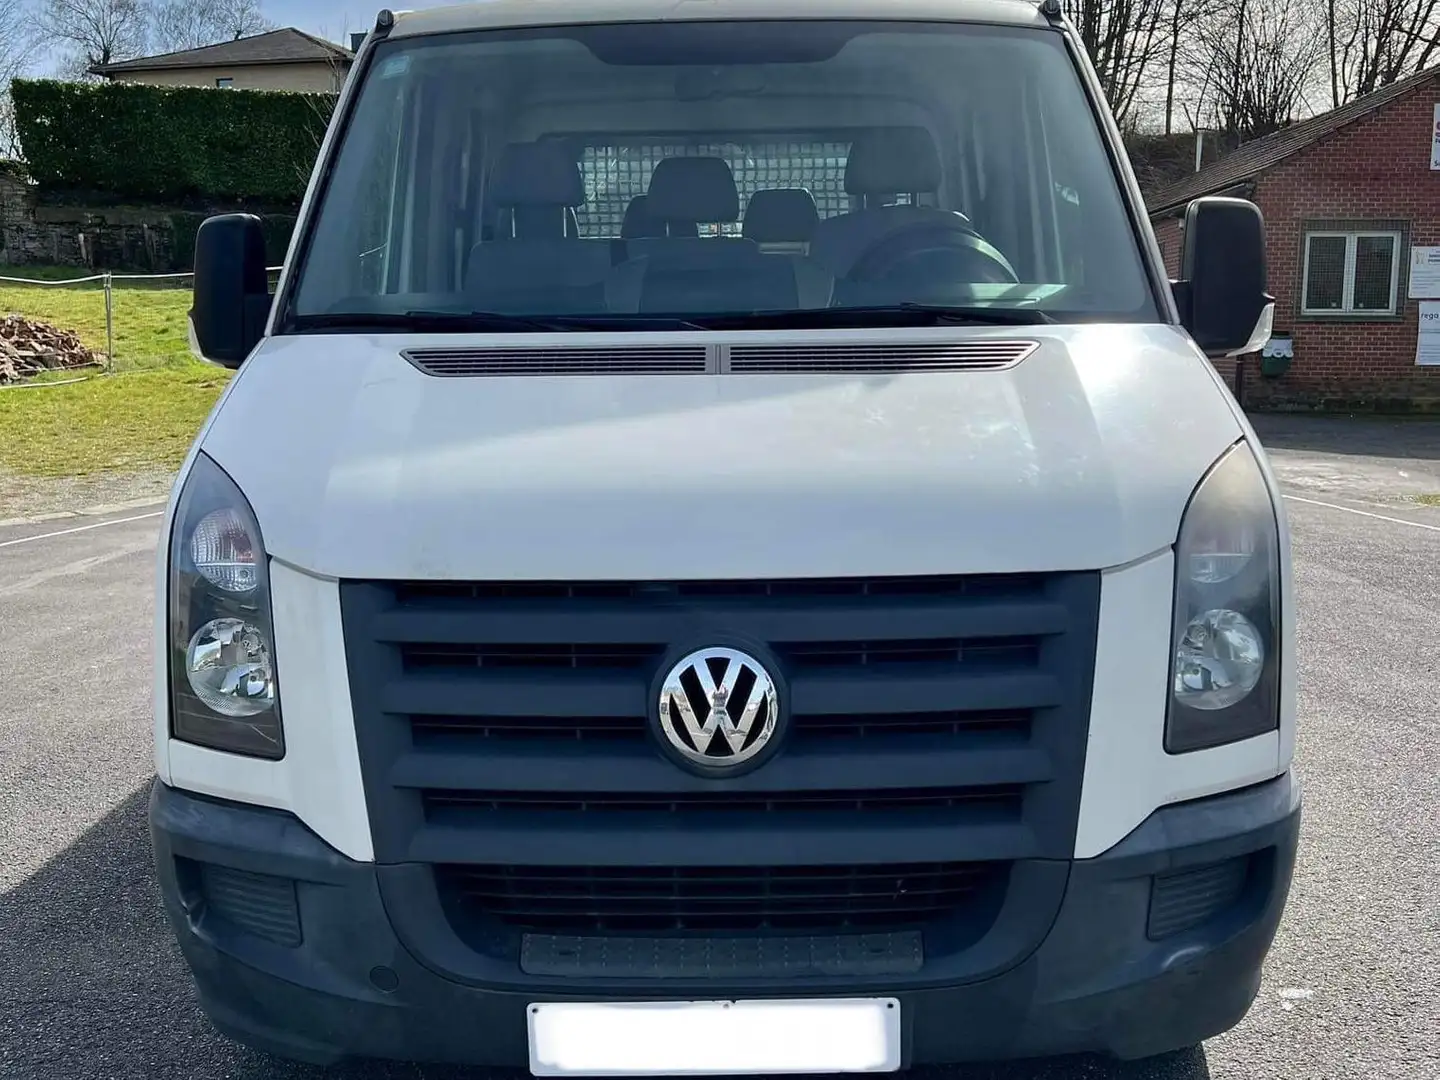 Volkswagen Crafter 2.5 TDI / UTILITAIRE - 7 places / Euro 5 Wit - 2